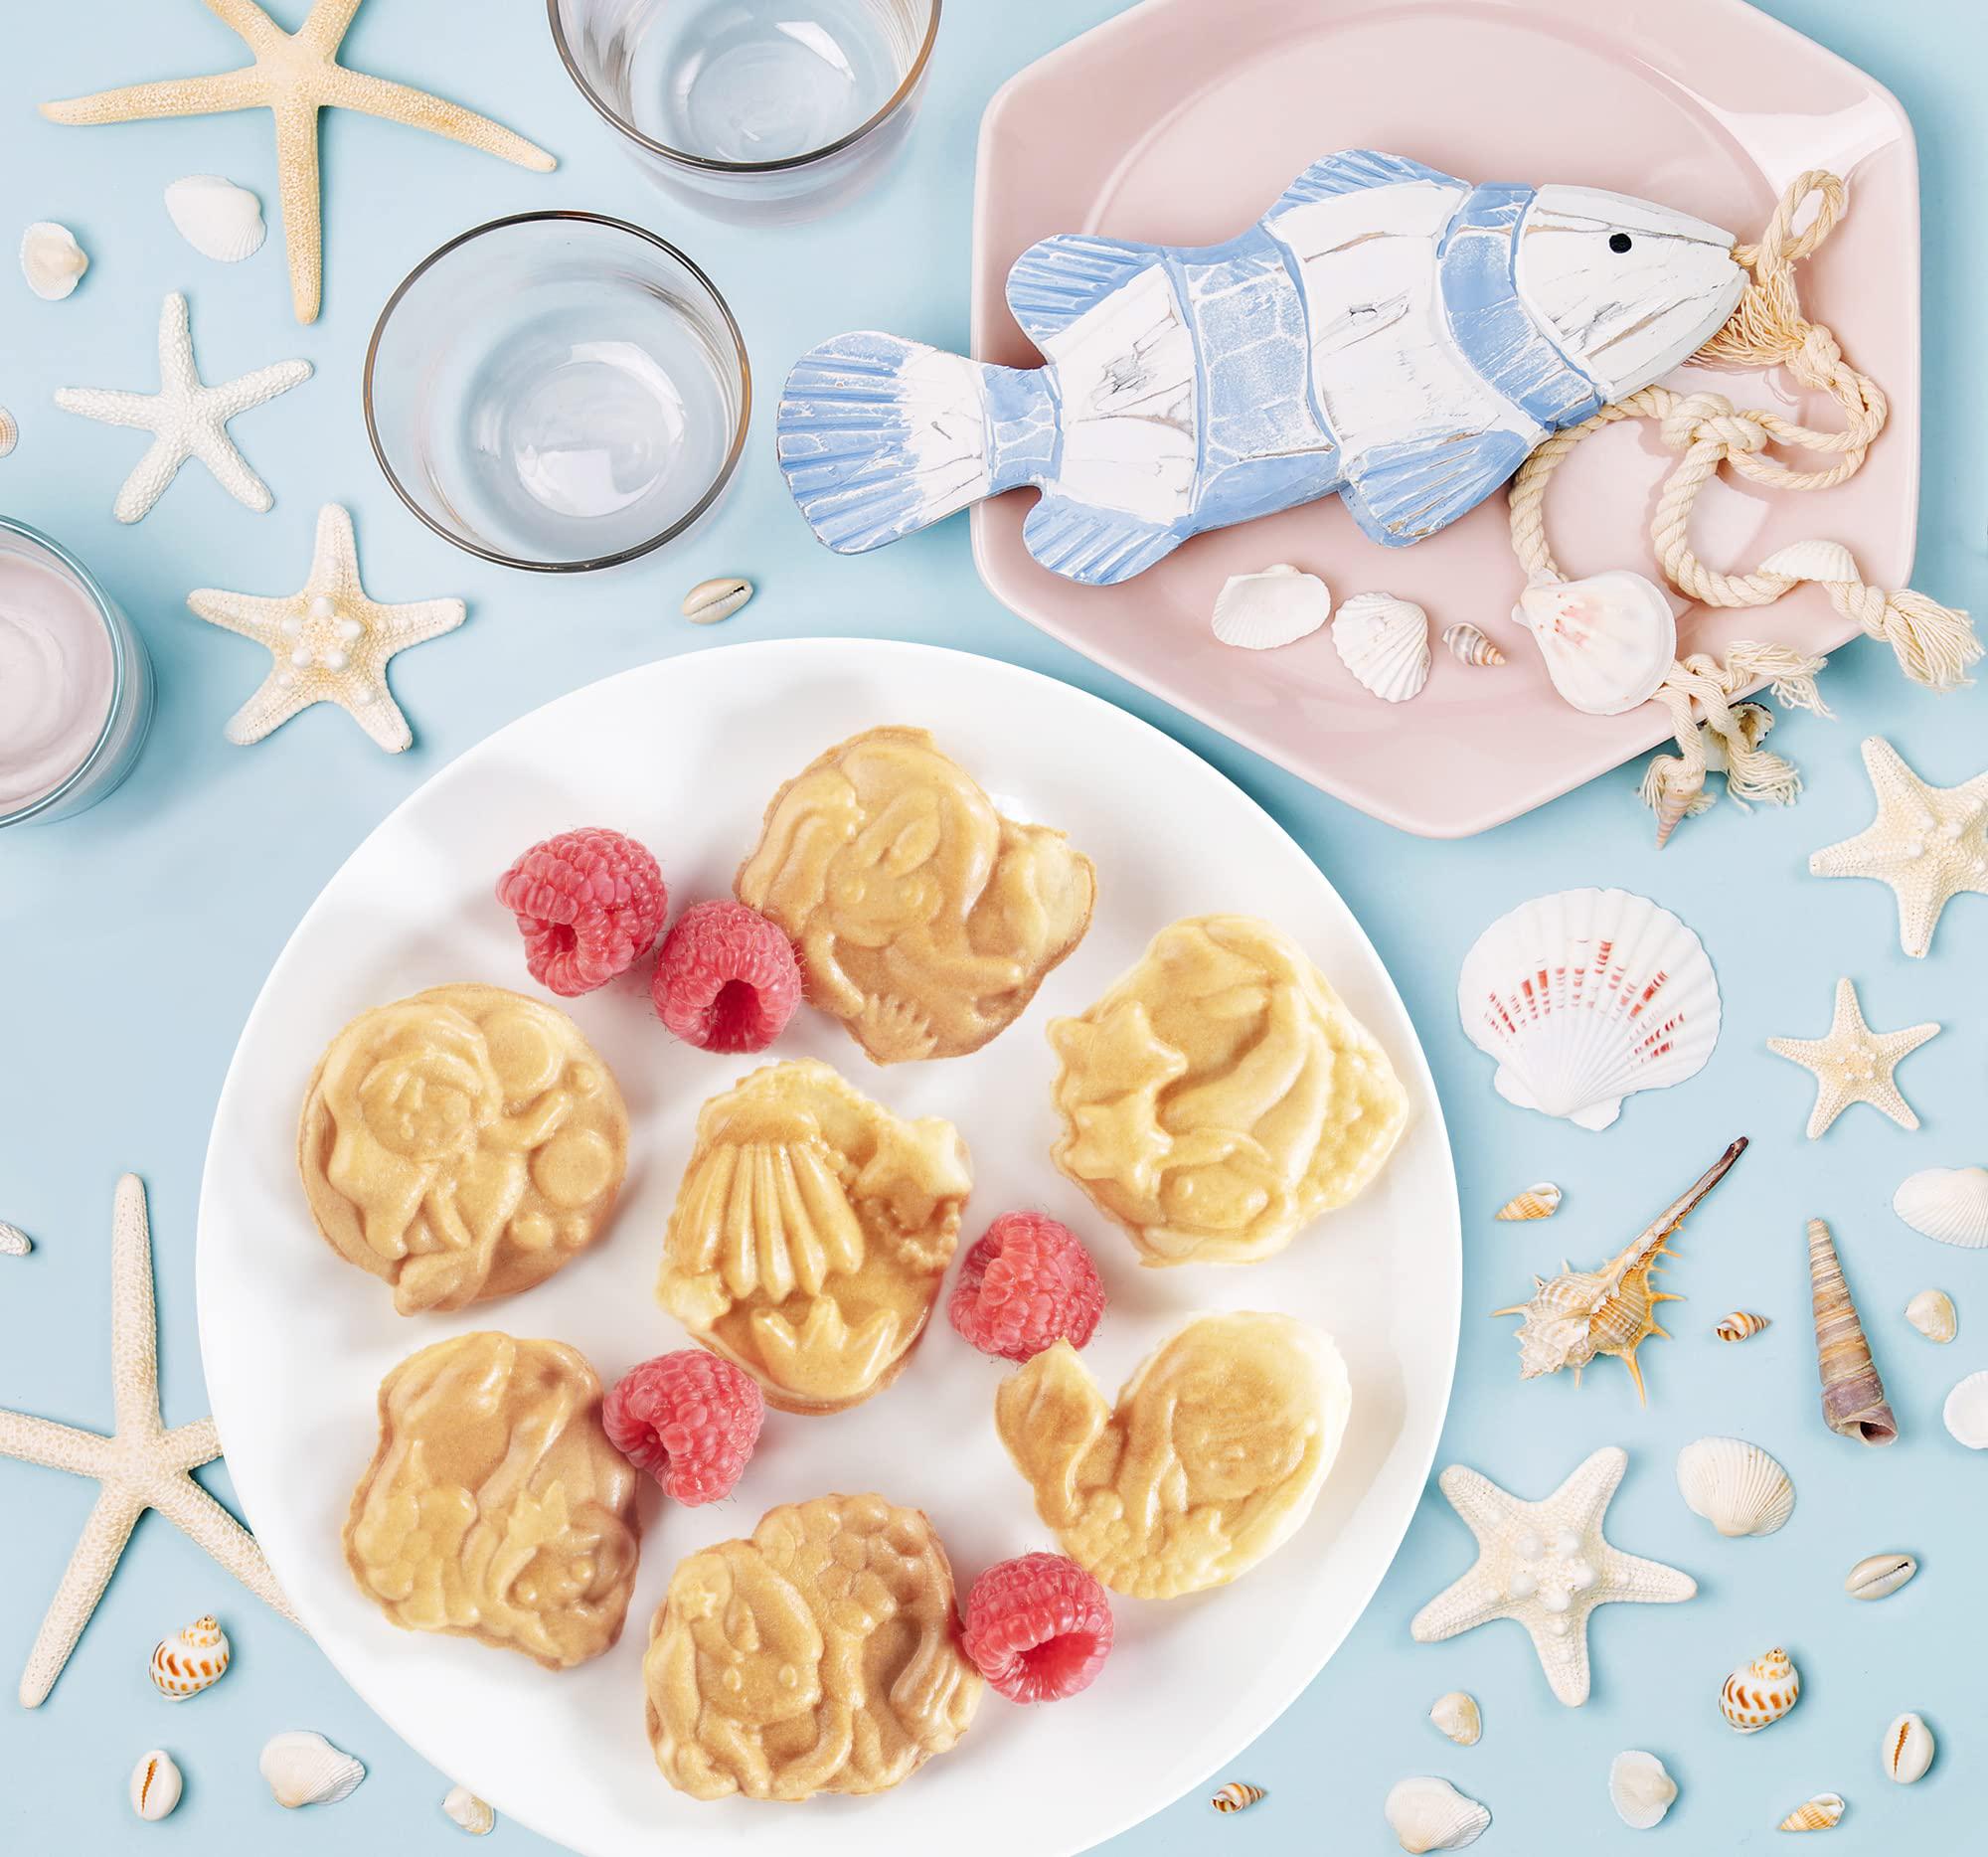 Waffle Wow! mermaid waffle maker, fun easter gift for kids- create 7 different mermaid shaped waffles in minutes - a fun, cool under the 